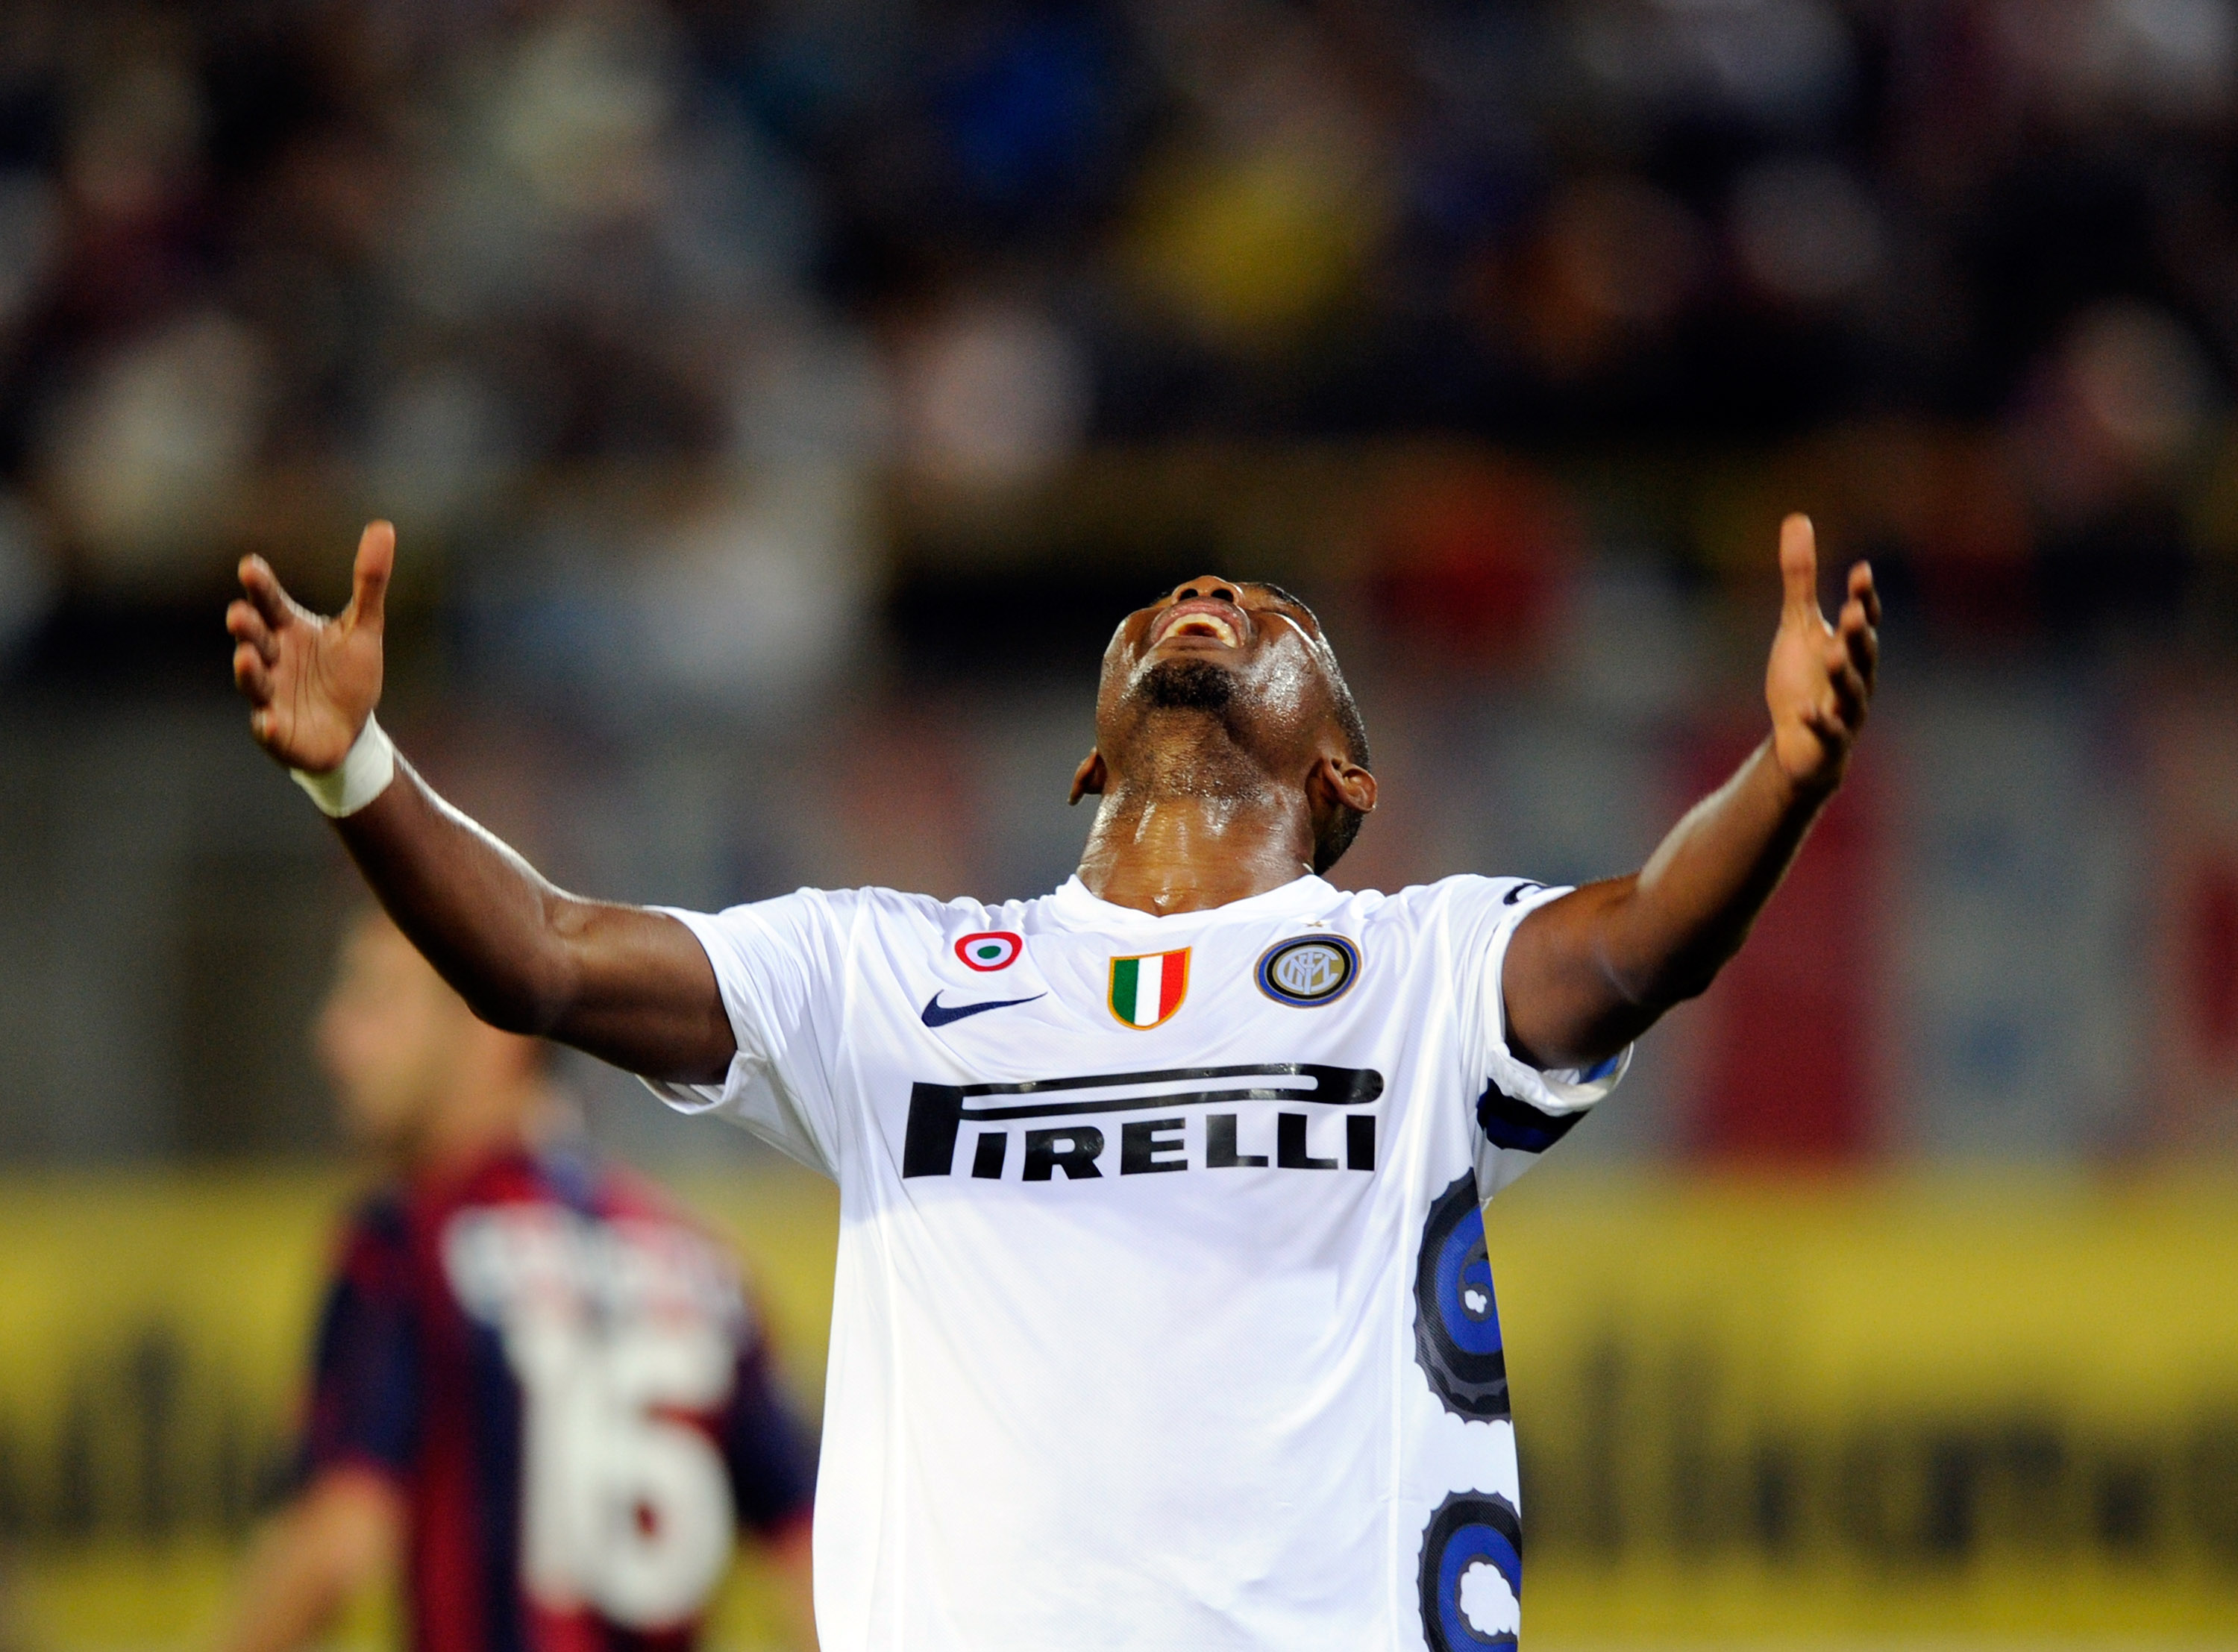 BOLOGNA, ITALY - AUGUST 30:  Samuel Eto'o of FC Internazionale Milano reacts during the Serie A match between Bologna and Inter at Stadio Renato Dall'Ara on August 30, 2010 in Bologna, Italy.  (Photo by Claudio Villa/Getty Images)